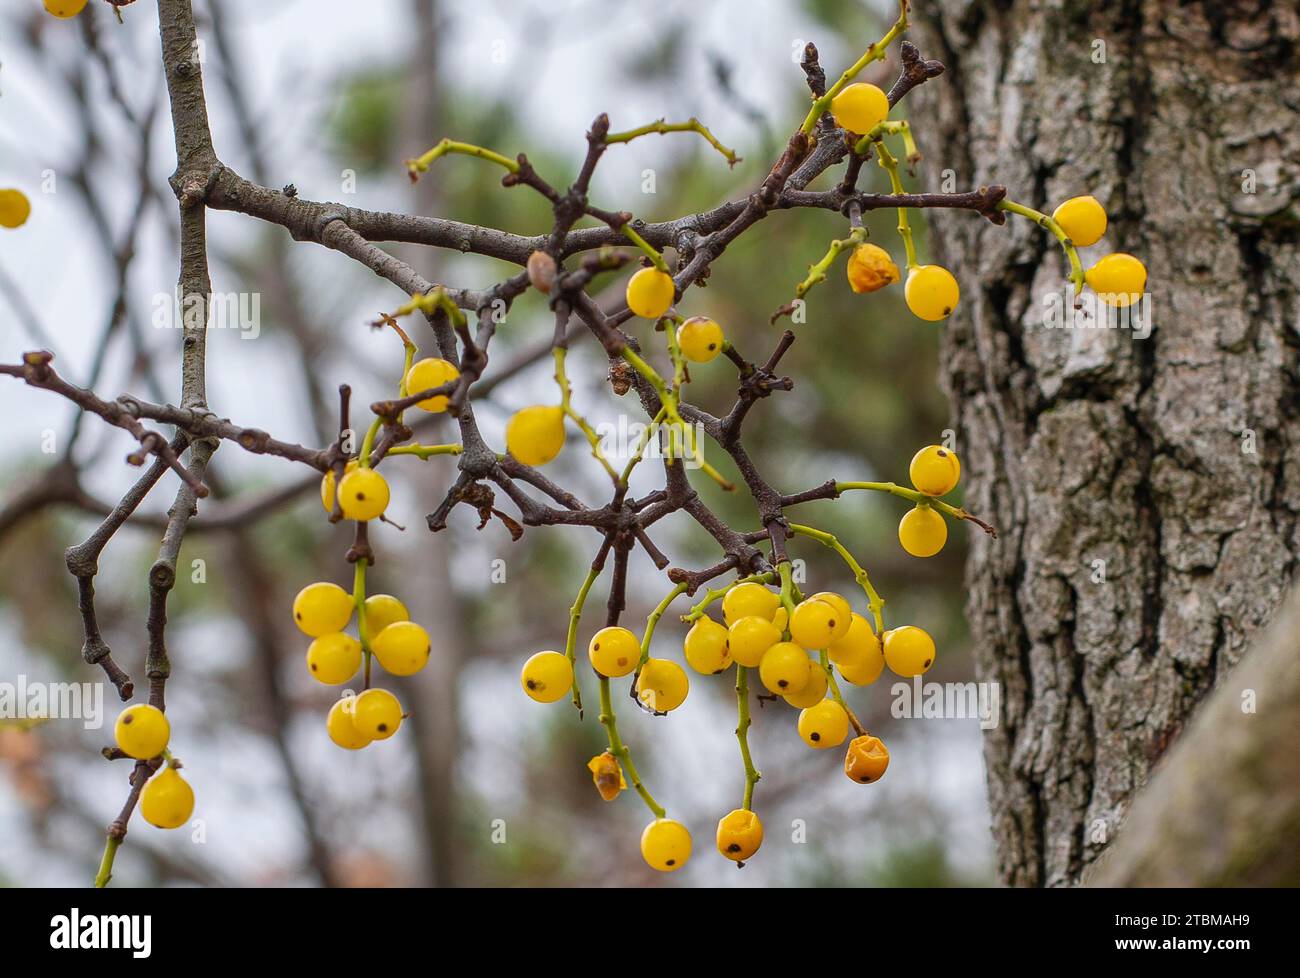 Yellow Loranthus berries (Loranthus europaeus) in the forest during the winter Stock Photo